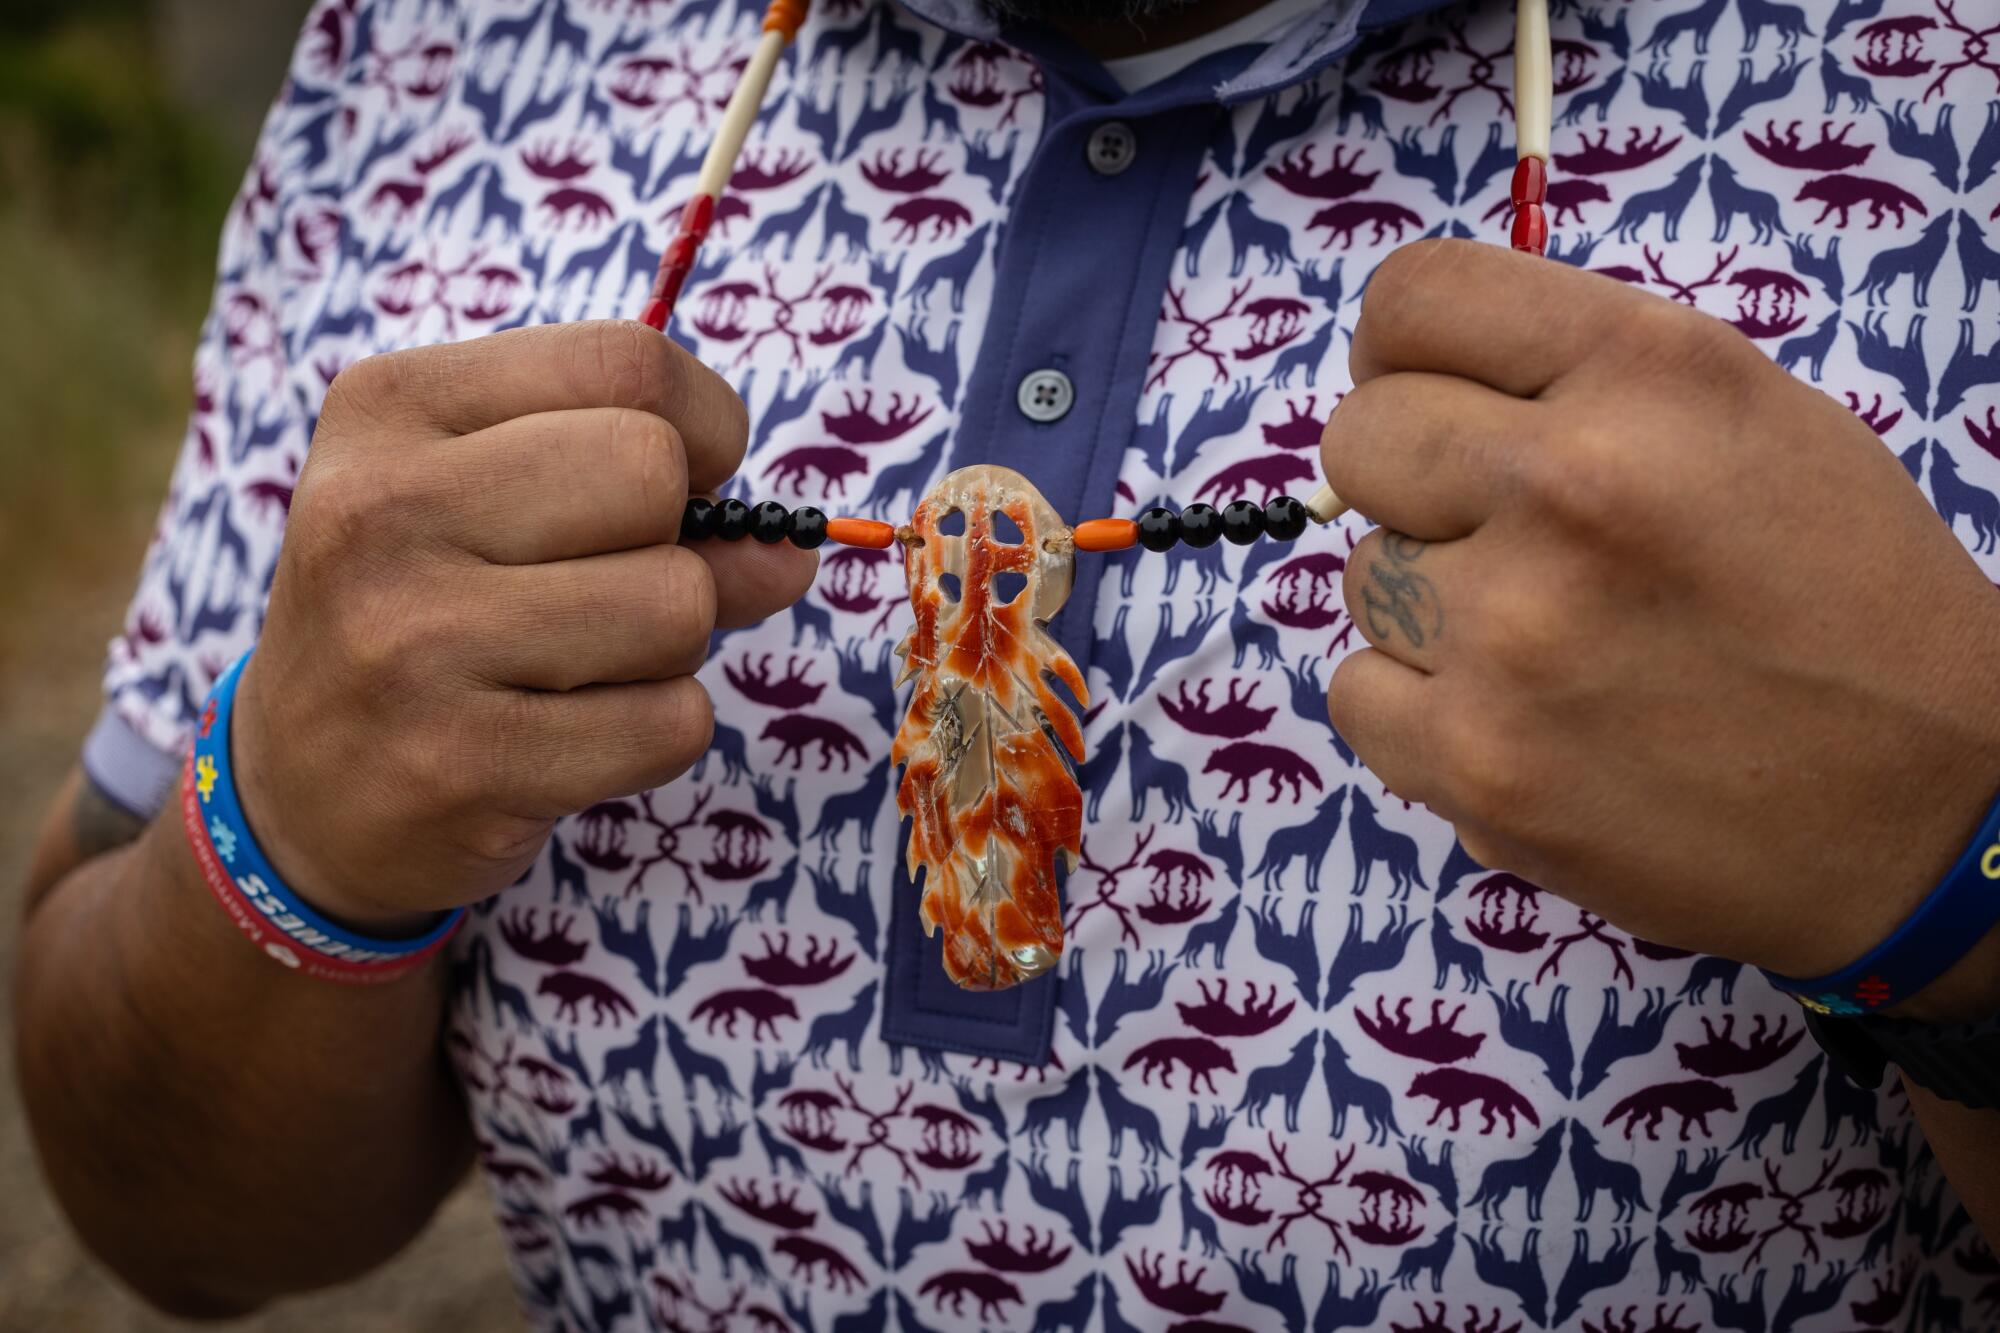 Anthony Roberts, tribal chairman of the Yocha Dehe Wintun Nation, wears Indigenous jewelry made of abalone shell.